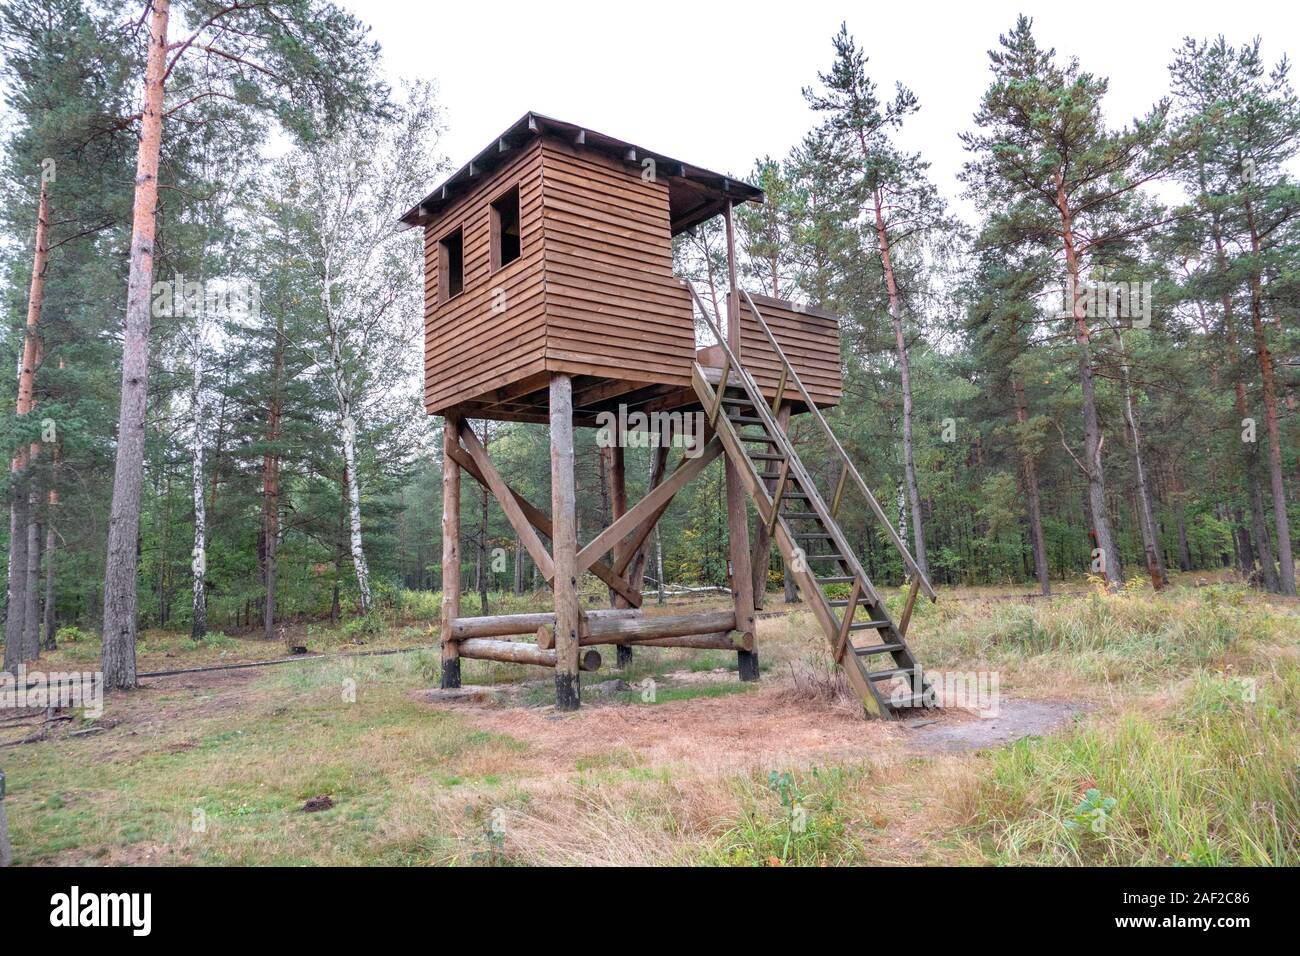 Guard tower and route of the Harry tunnel of the famous Great Escape 1944. 76 men escaped through the tunnel on 25th March 1944. Stalag Luft III - Sta Stock Photo